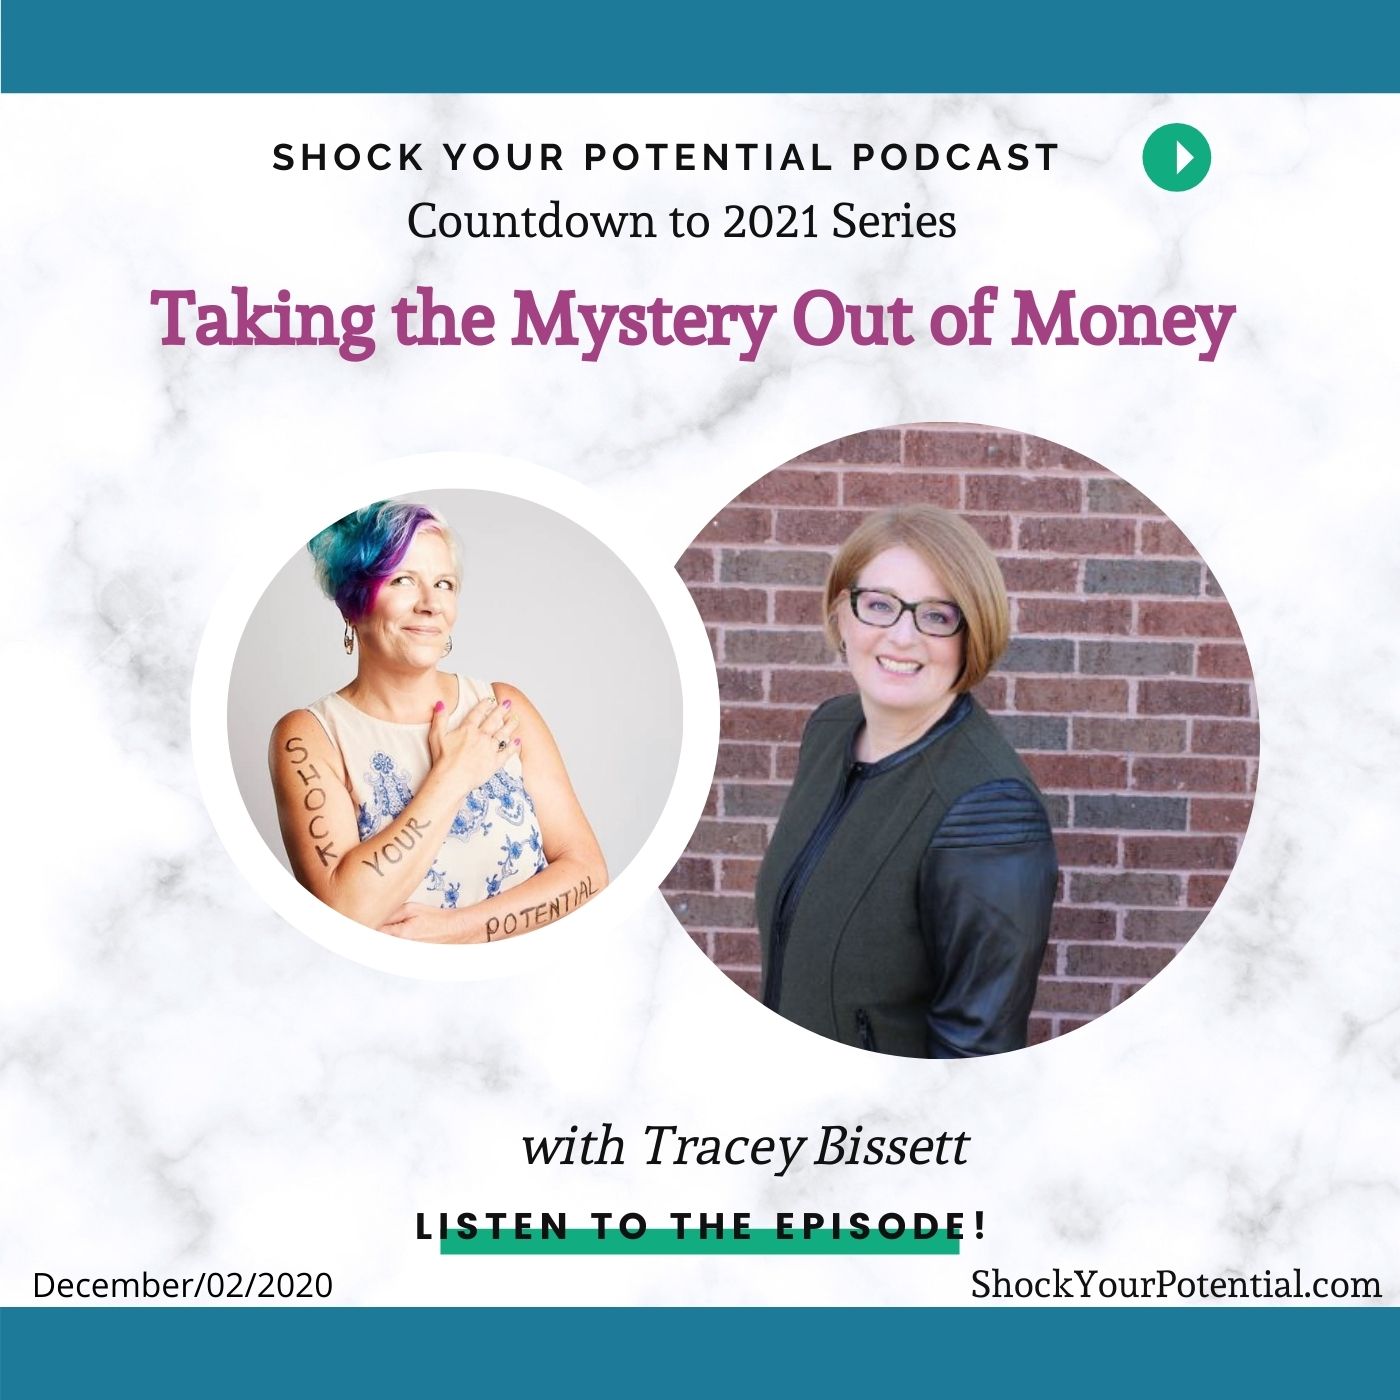 Taking the Mystery Out of Money – Tracey Bisset